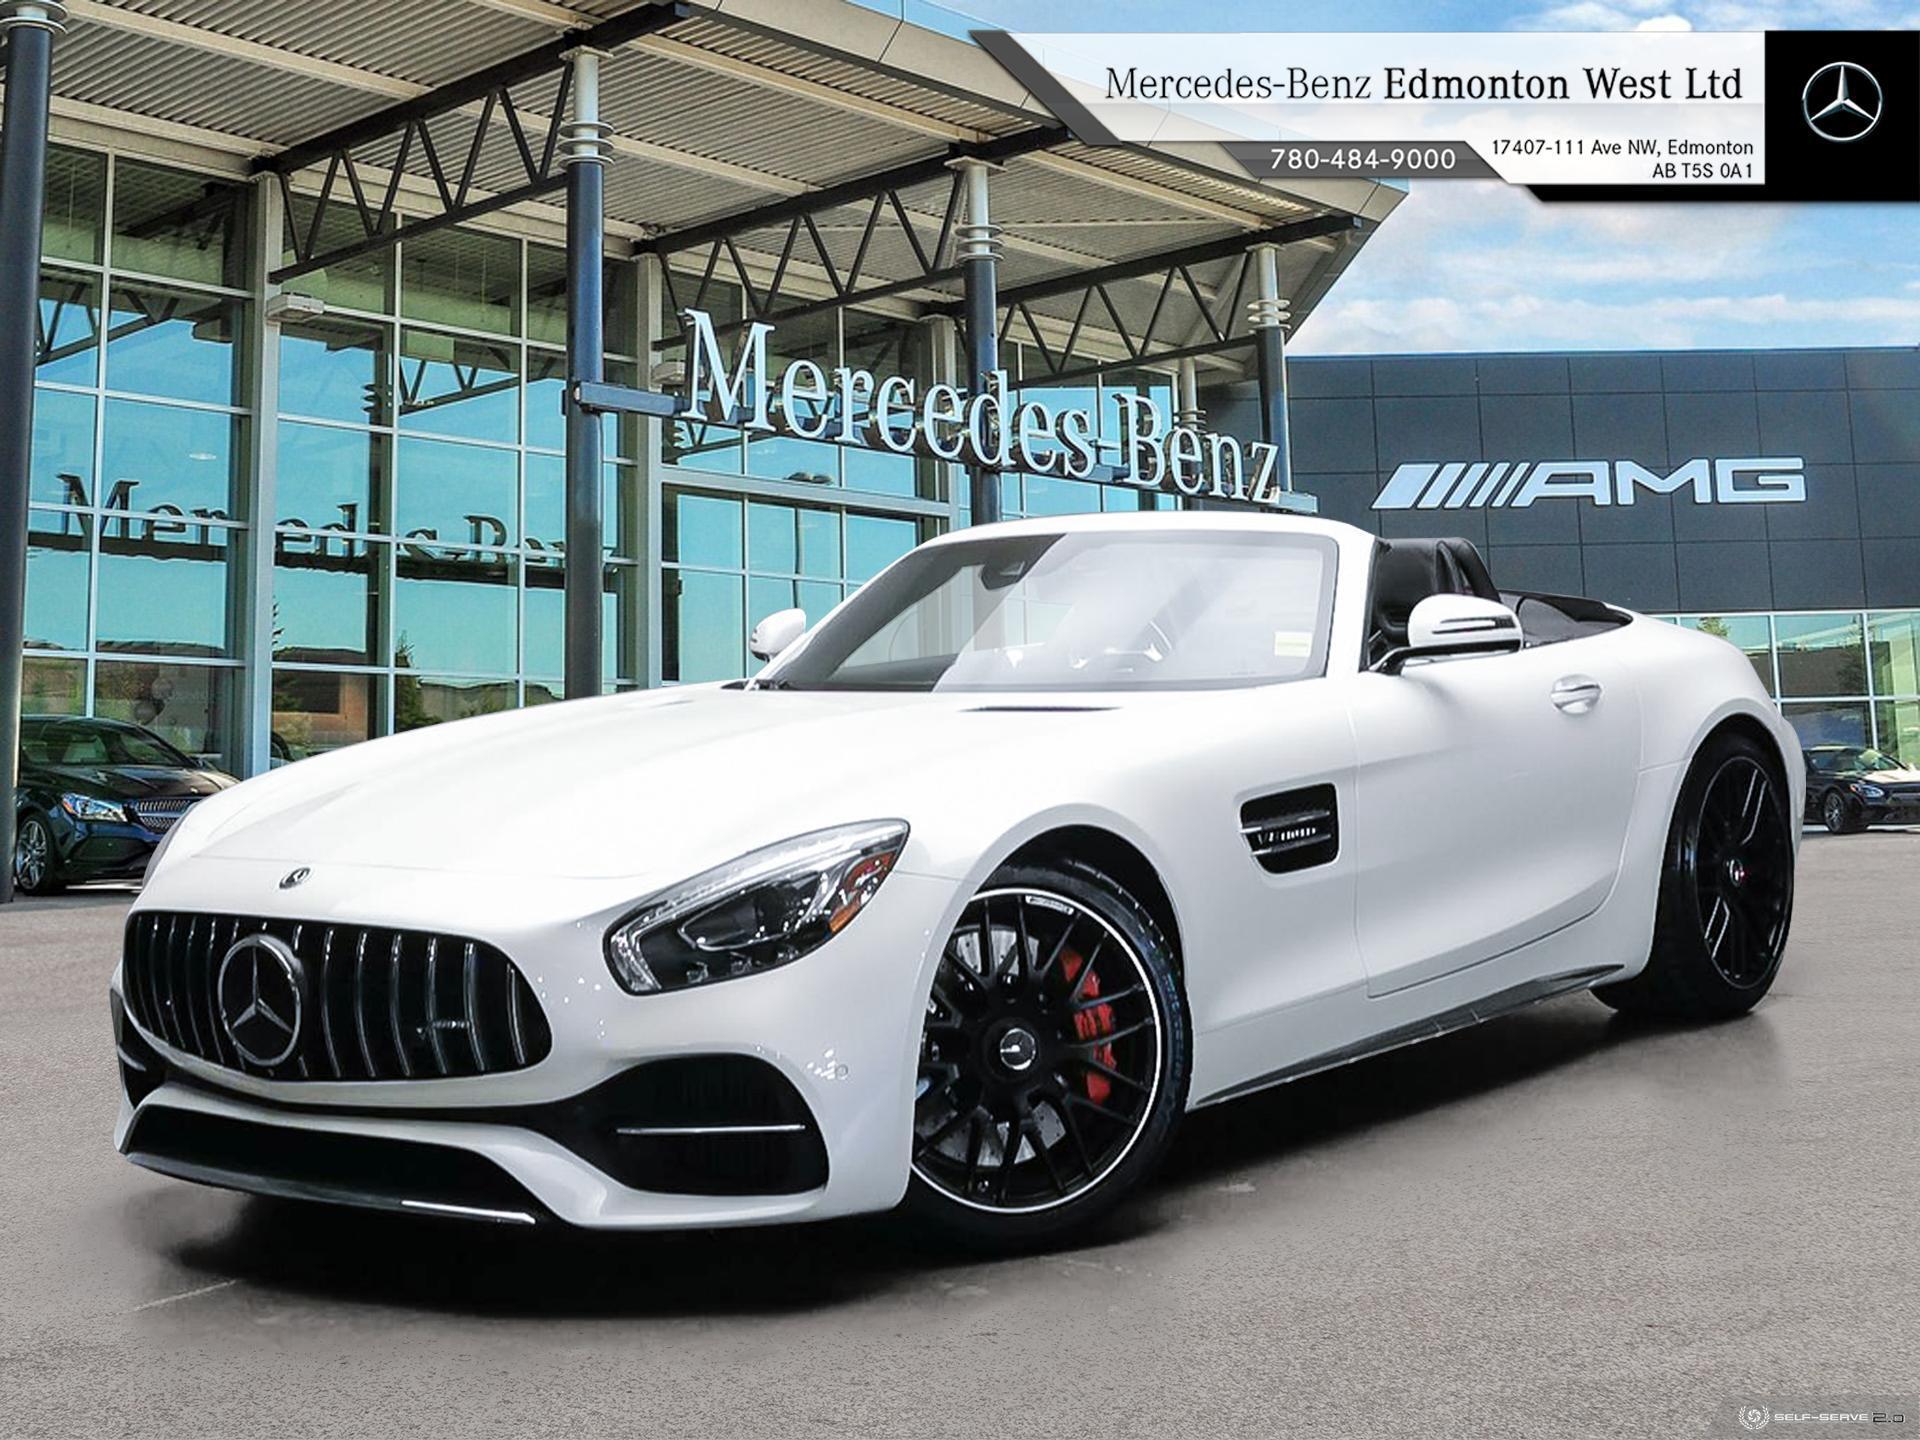 2018 Mercedes-Benz AMG GT C Roadster  - Low Kms - Xpel Protection Film - 550